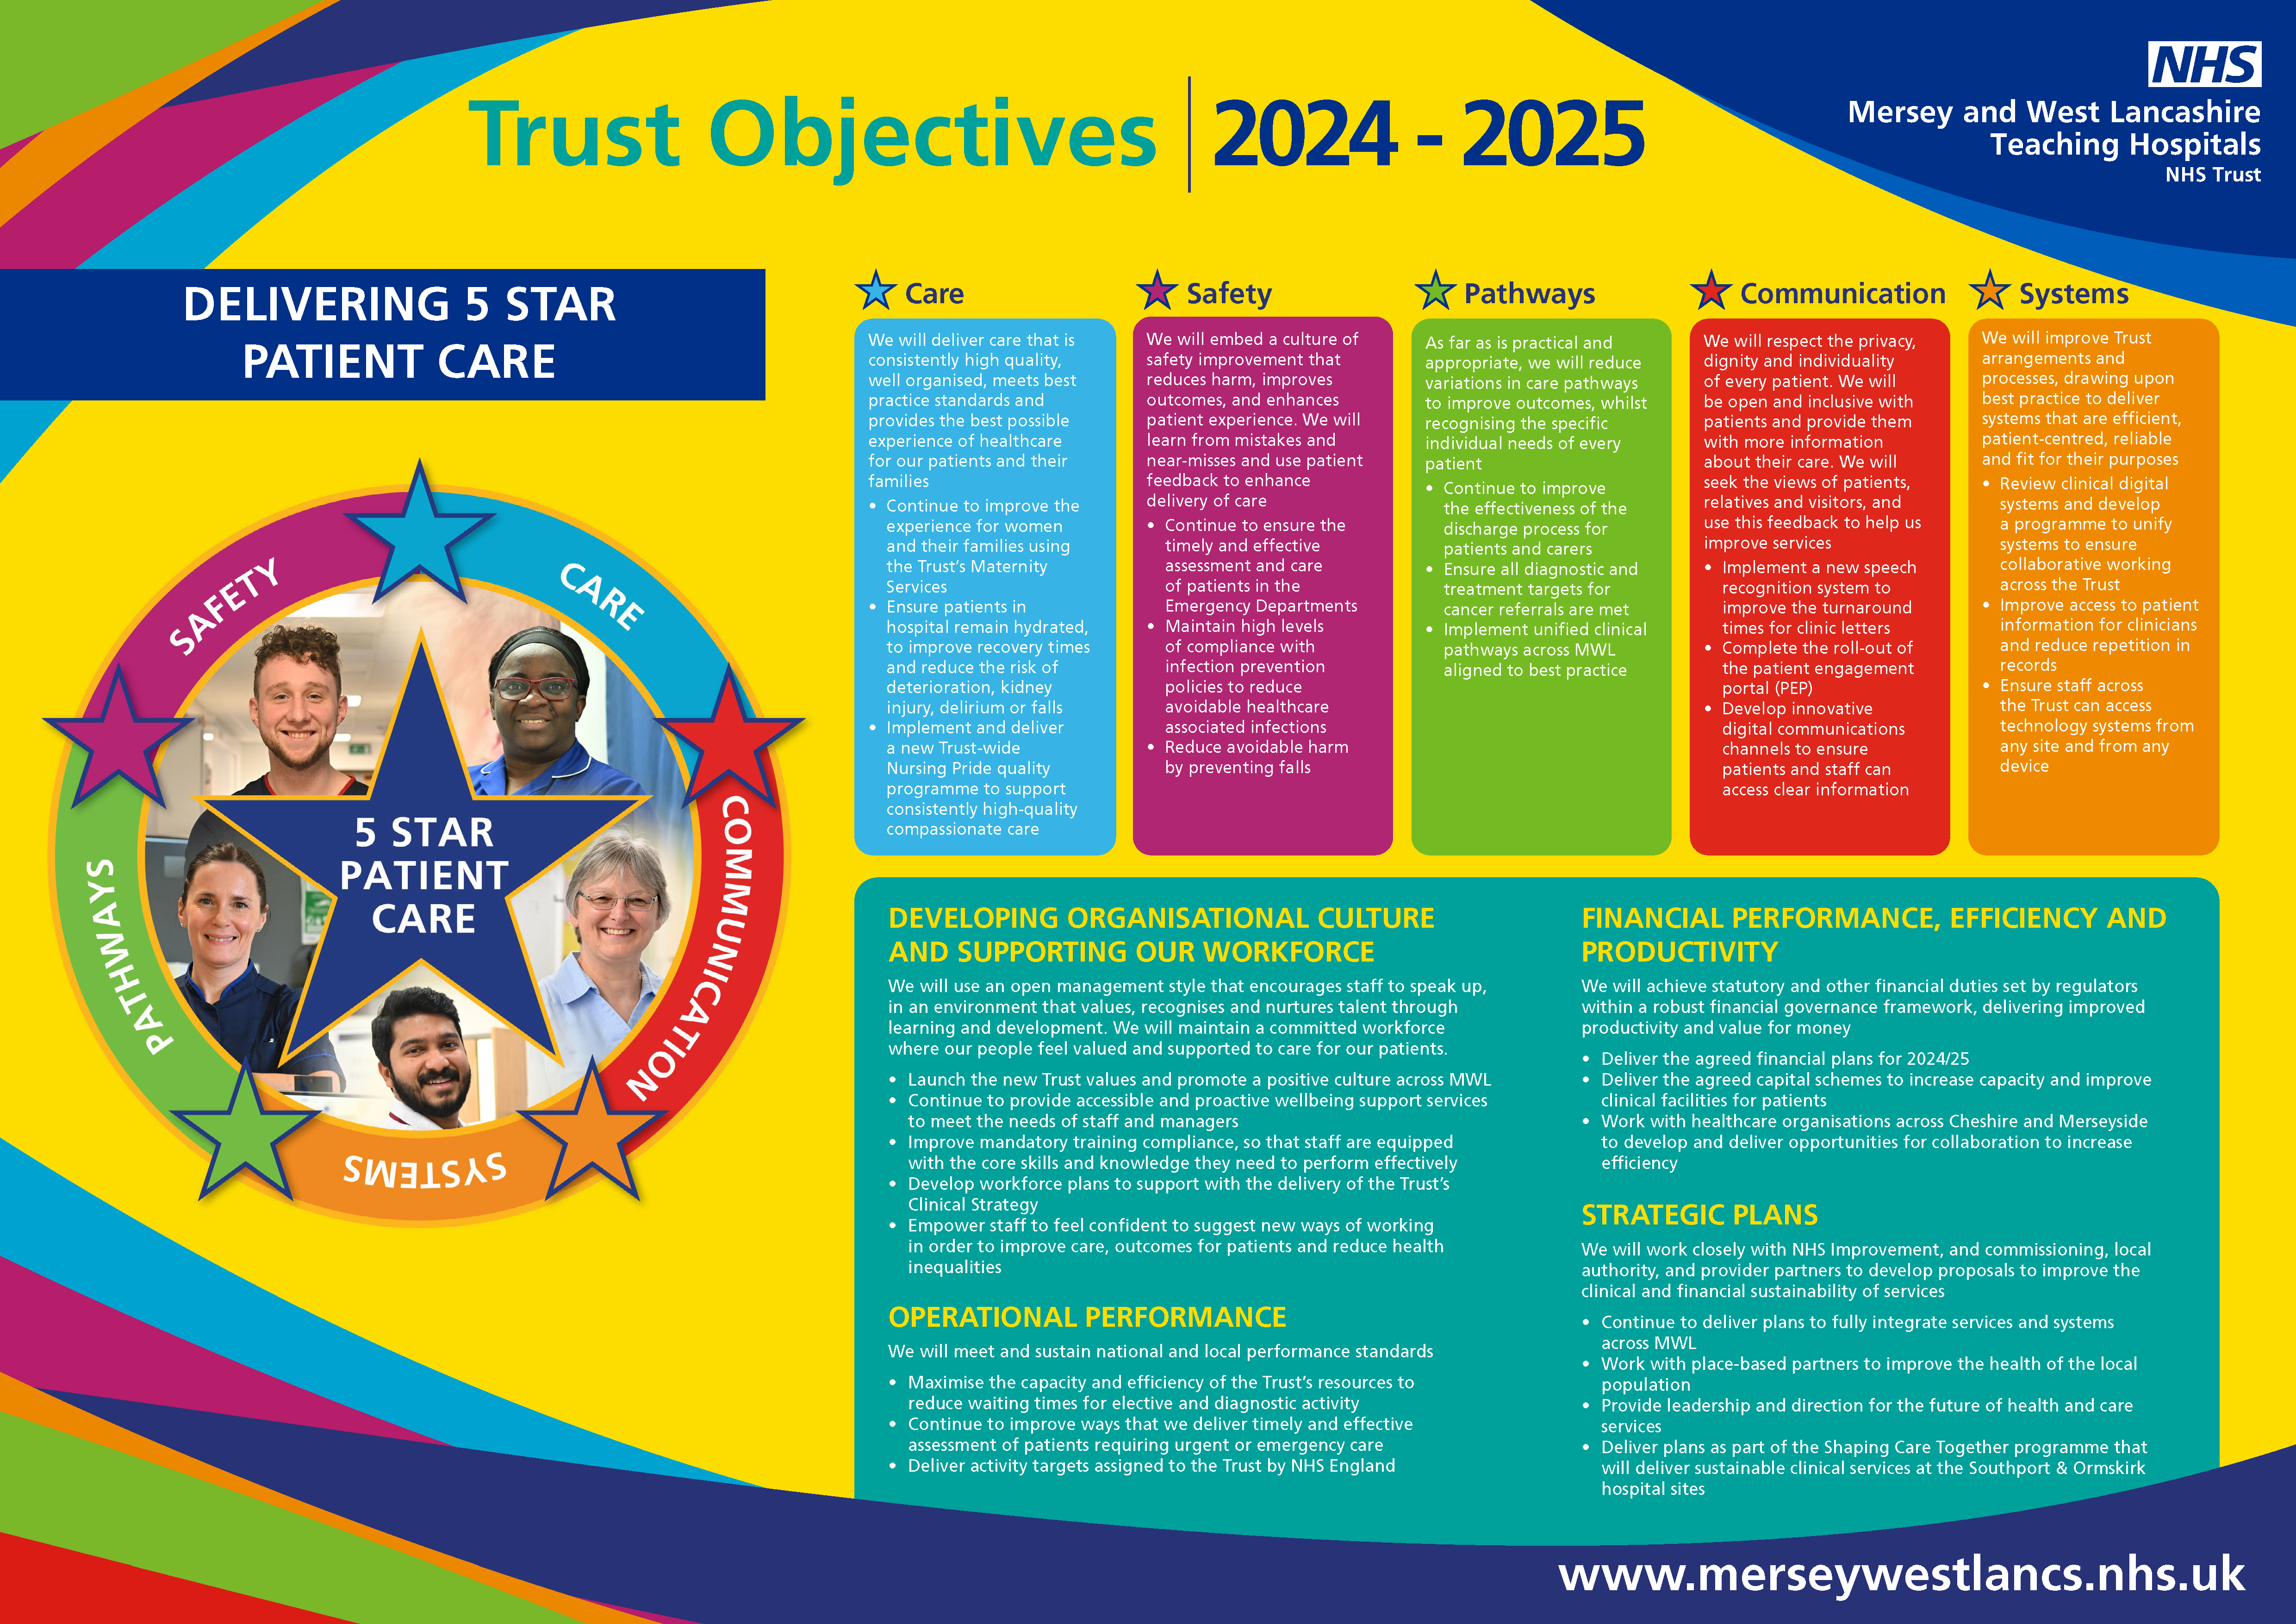 Trust Objectives 2024-25